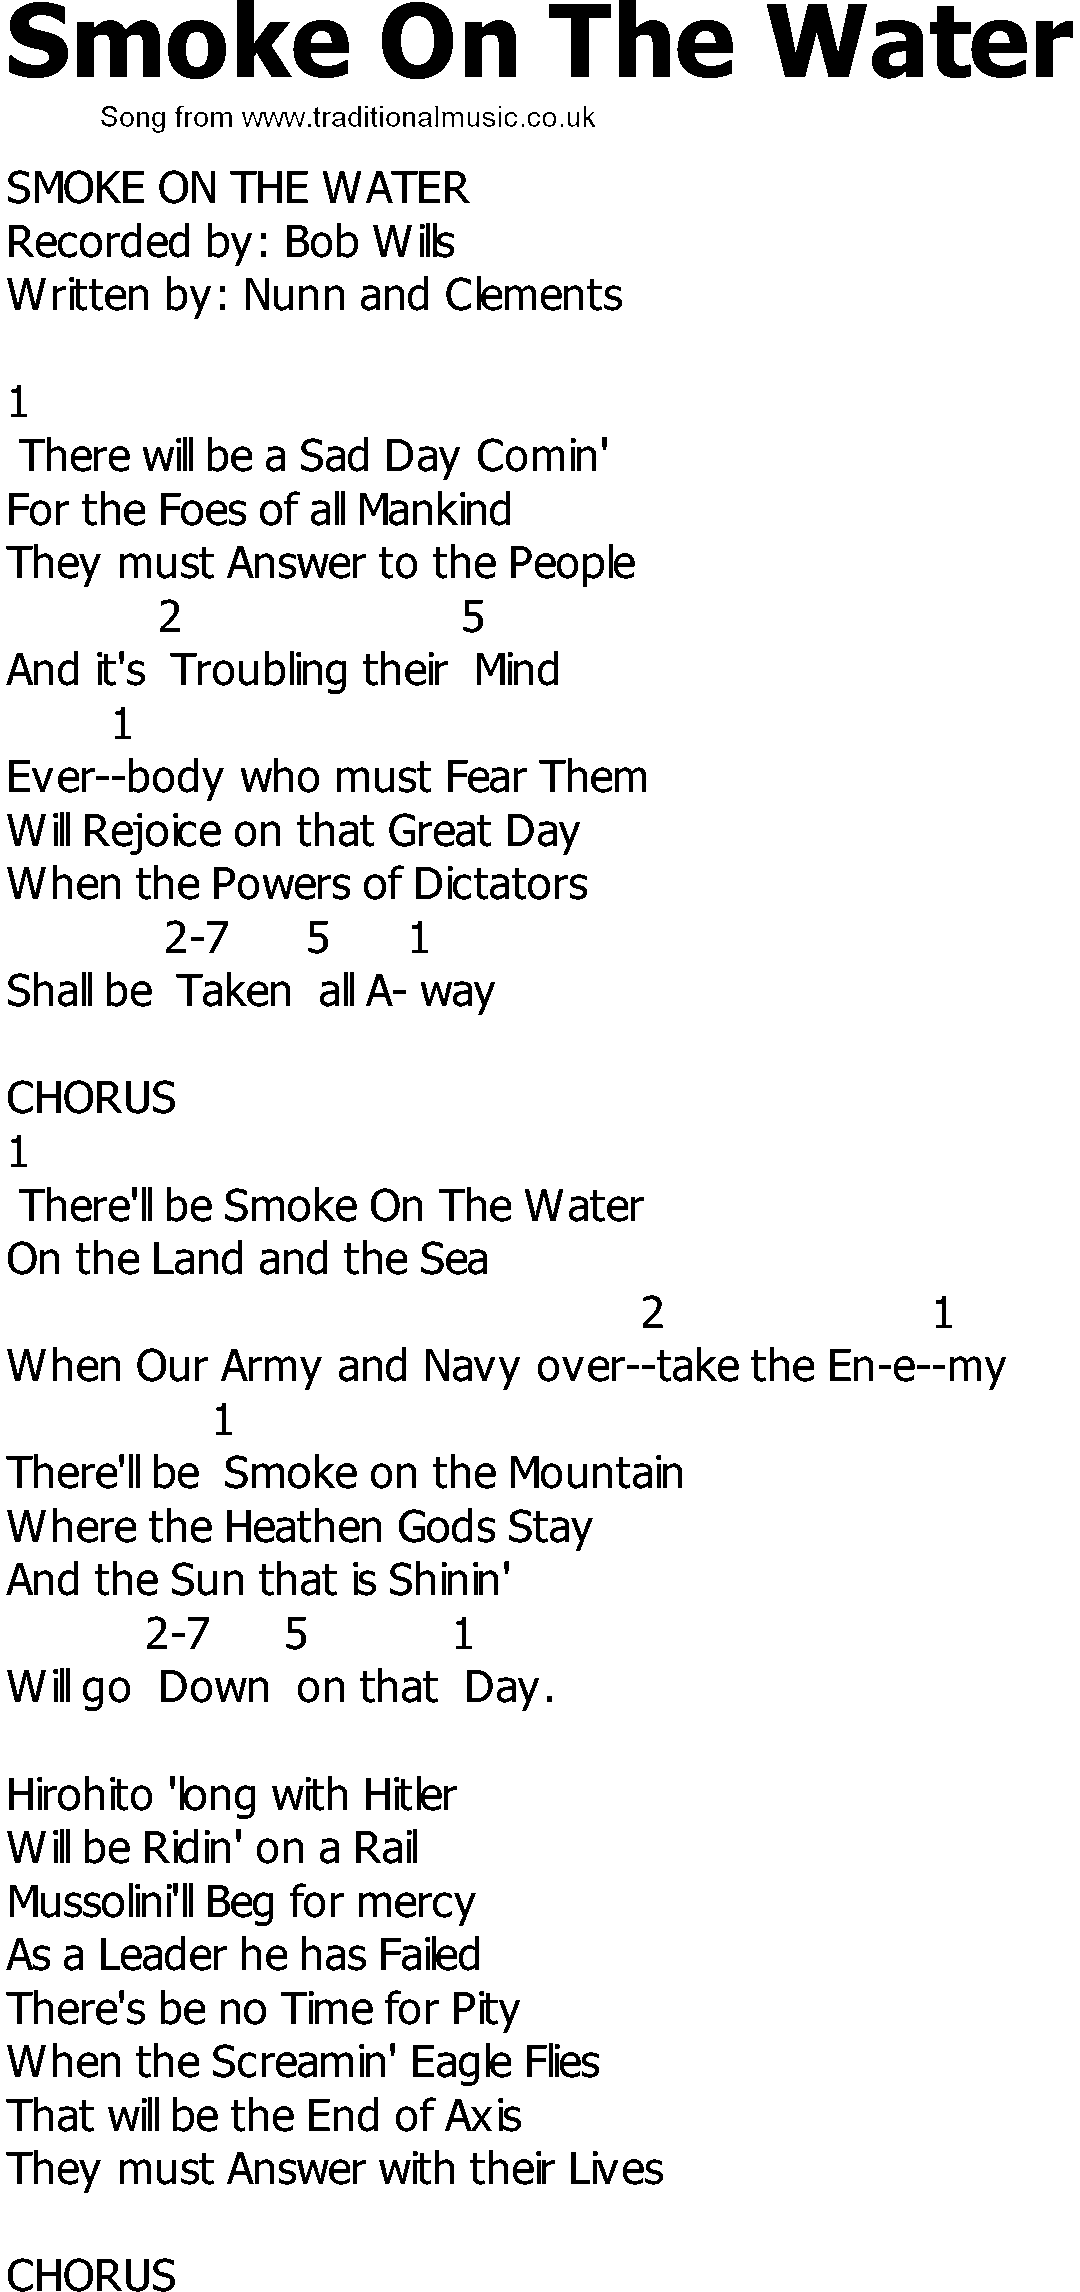 Old Country song lyrics with chords - Smoke On The Water